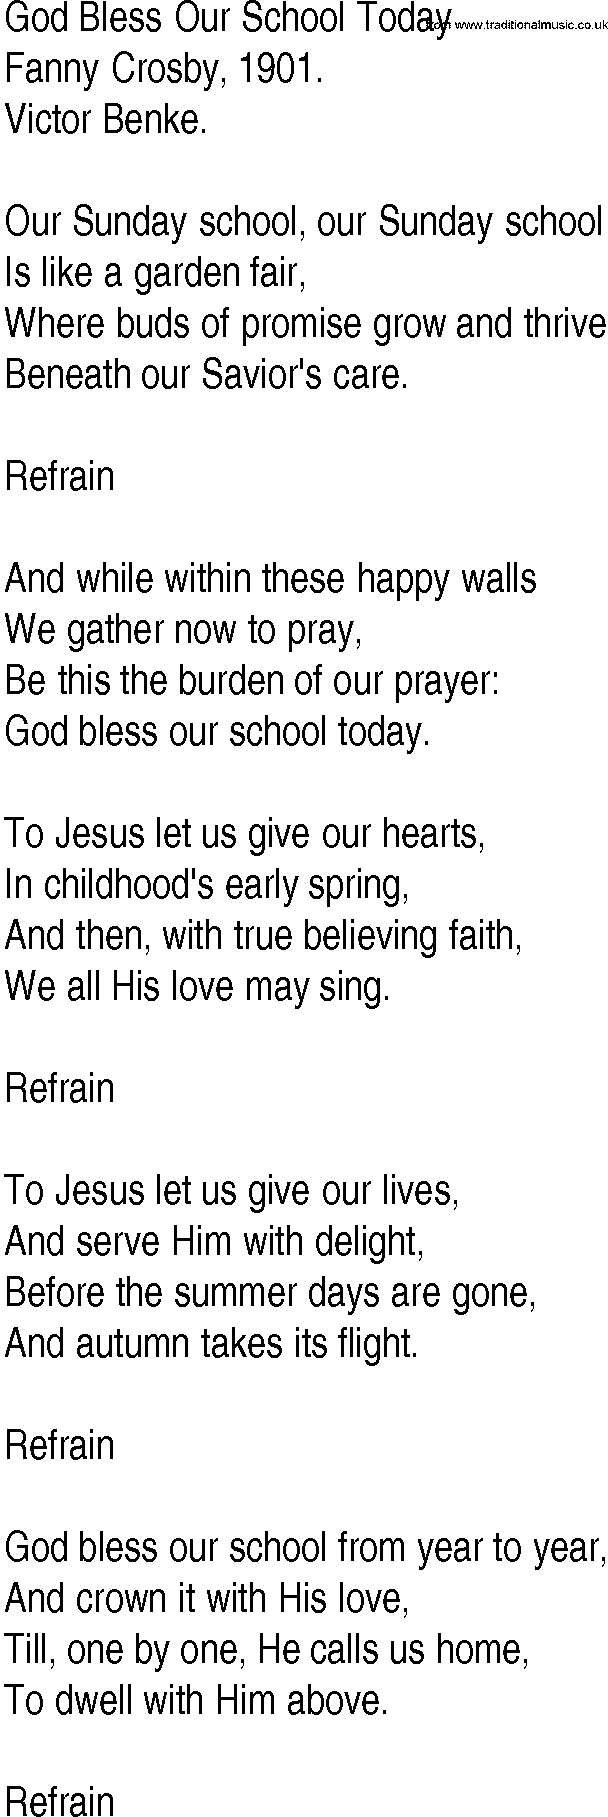 Hymn and Gospel Song: God Bless Our School Today by Fanny Crosby lyrics